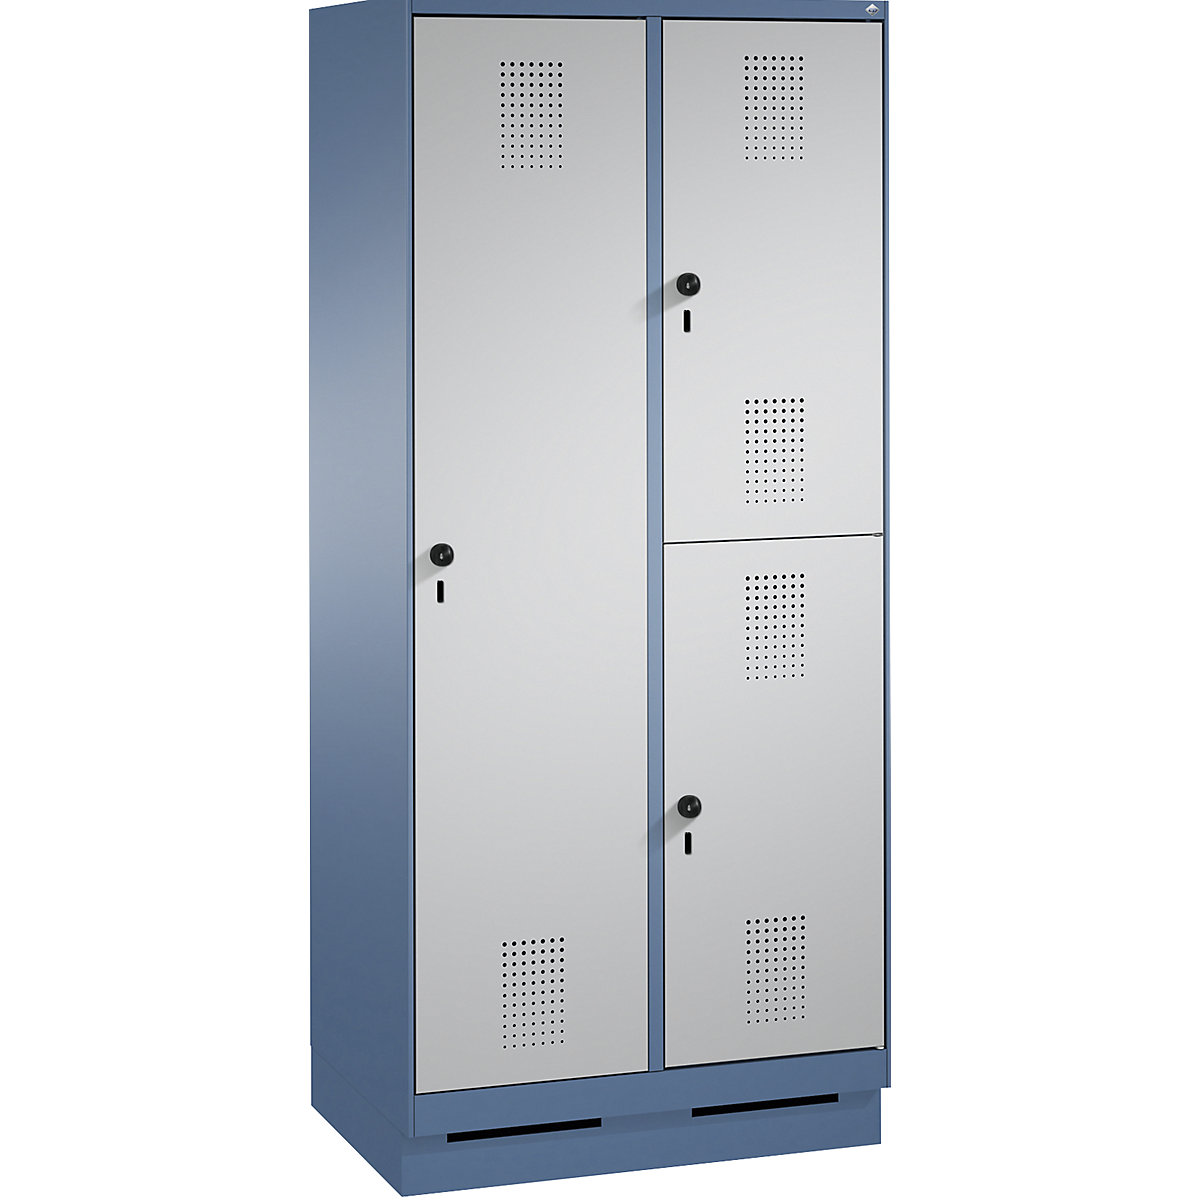 EVOLO combination cupboard, single and double tier – C+P, 2 compartments, 3 doors, compartment width 400 mm, with plinth, distant blue / white aluminium